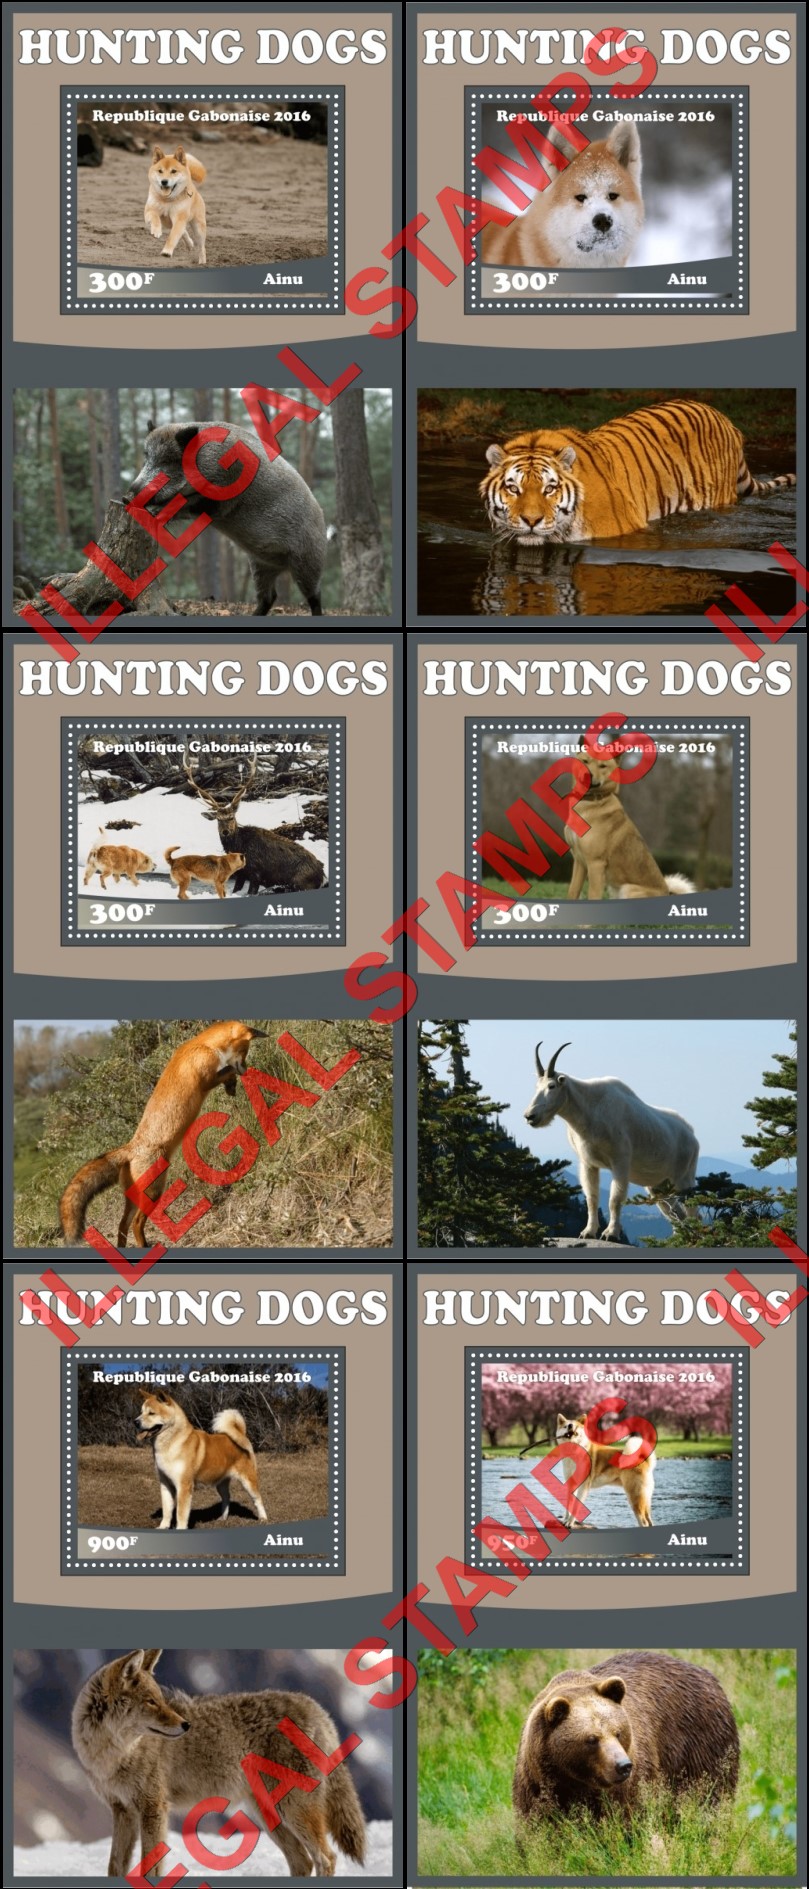 Gabon 2016 Dogs Hunting Ainu (different c) Illegal Stamp Souvenir Sheets of 1